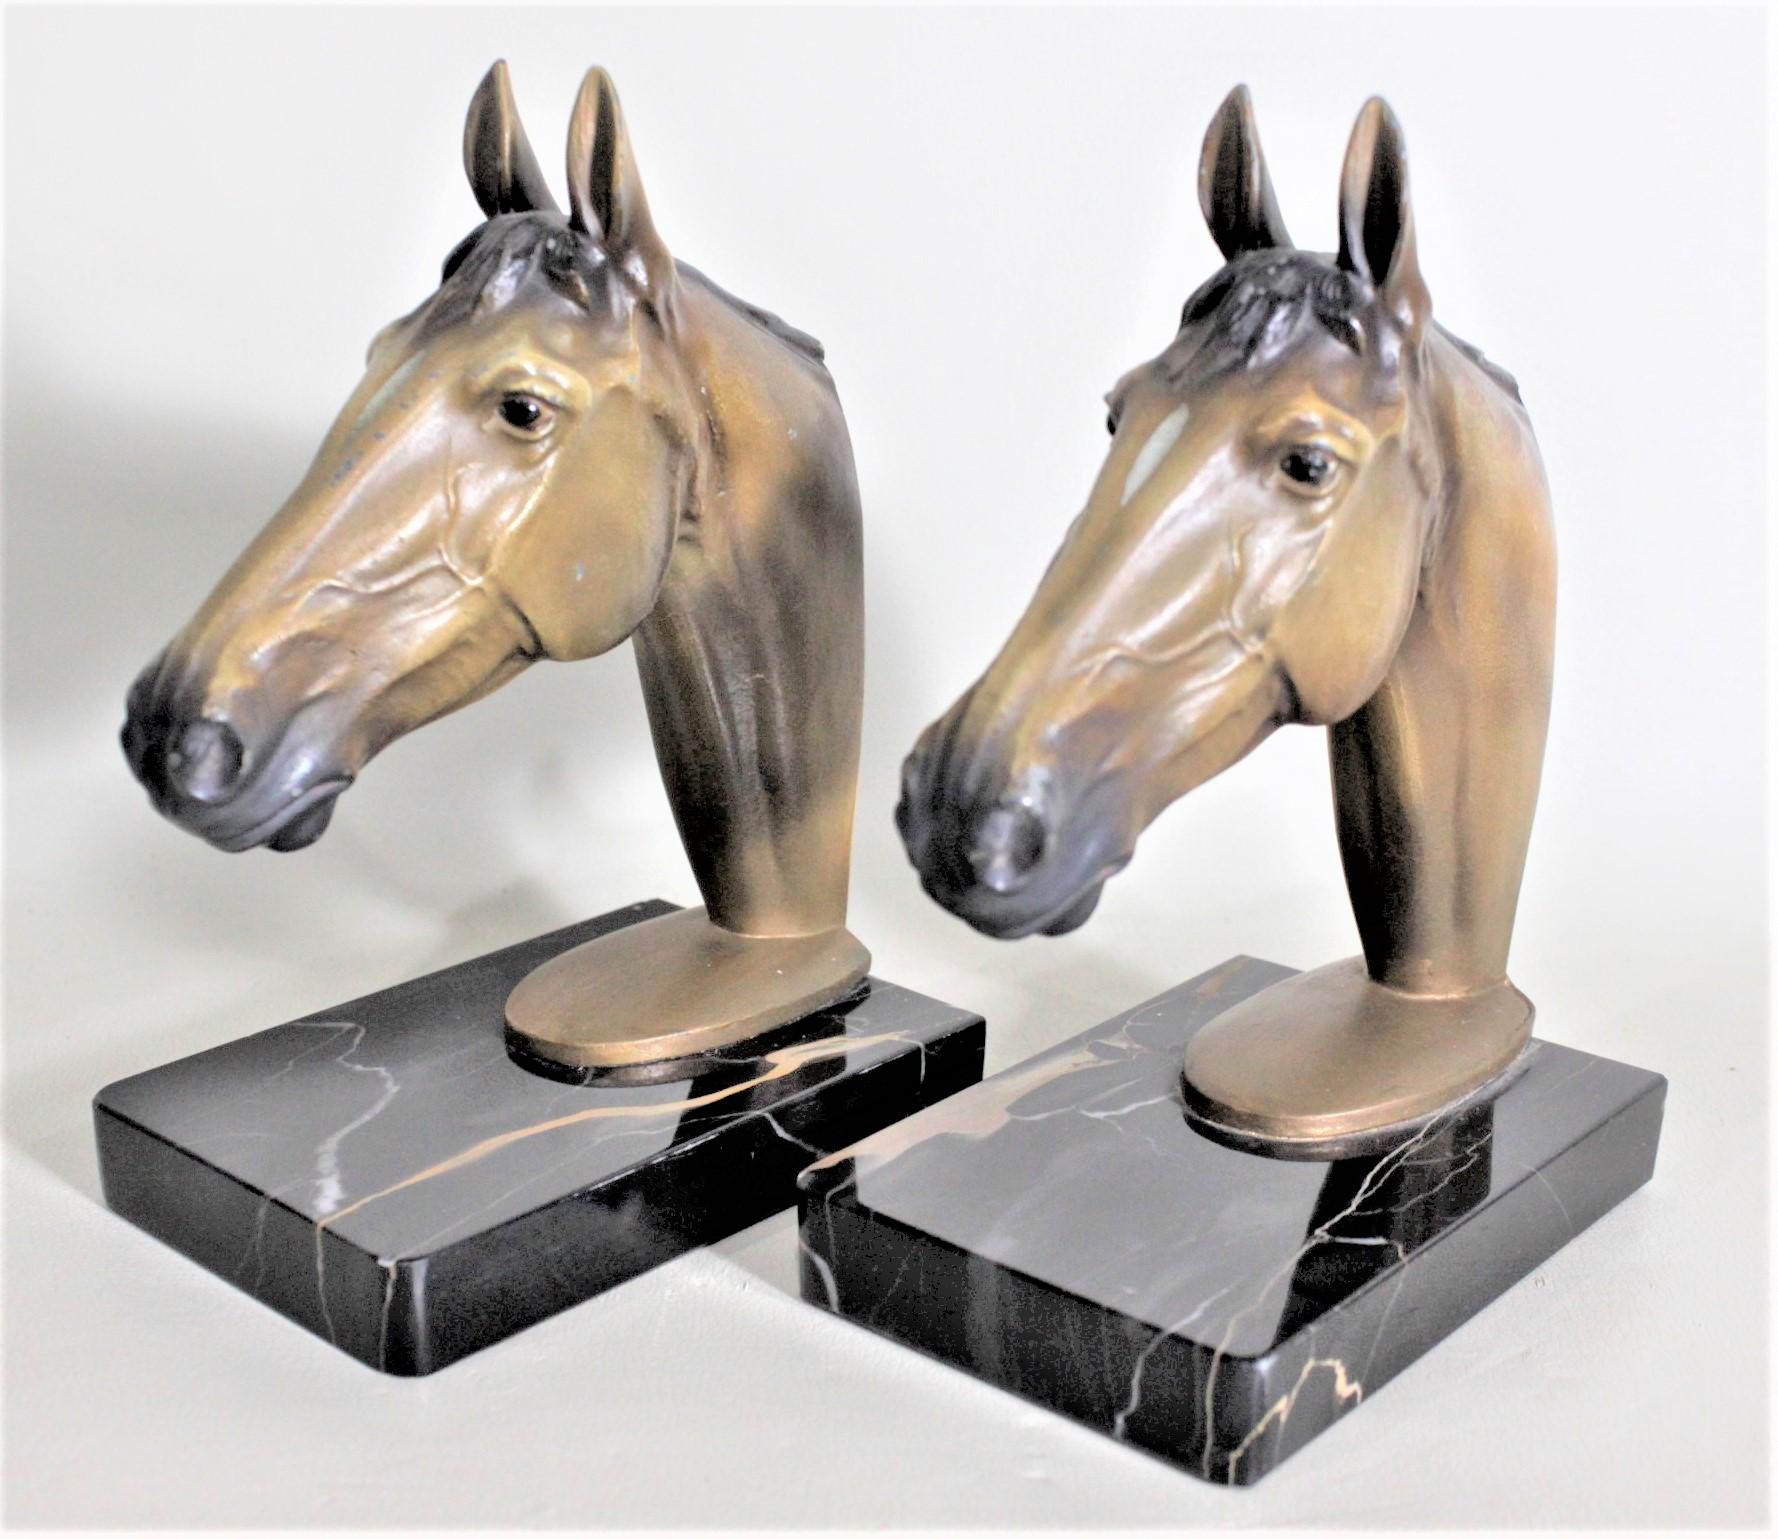 This pair of cast and cold-painted sculptural horse head bookends are unsigned, but presumed to have been made in England in approximately 1960 in a realistic style. The well executed cast and painted bookends are mounted on polished granite block